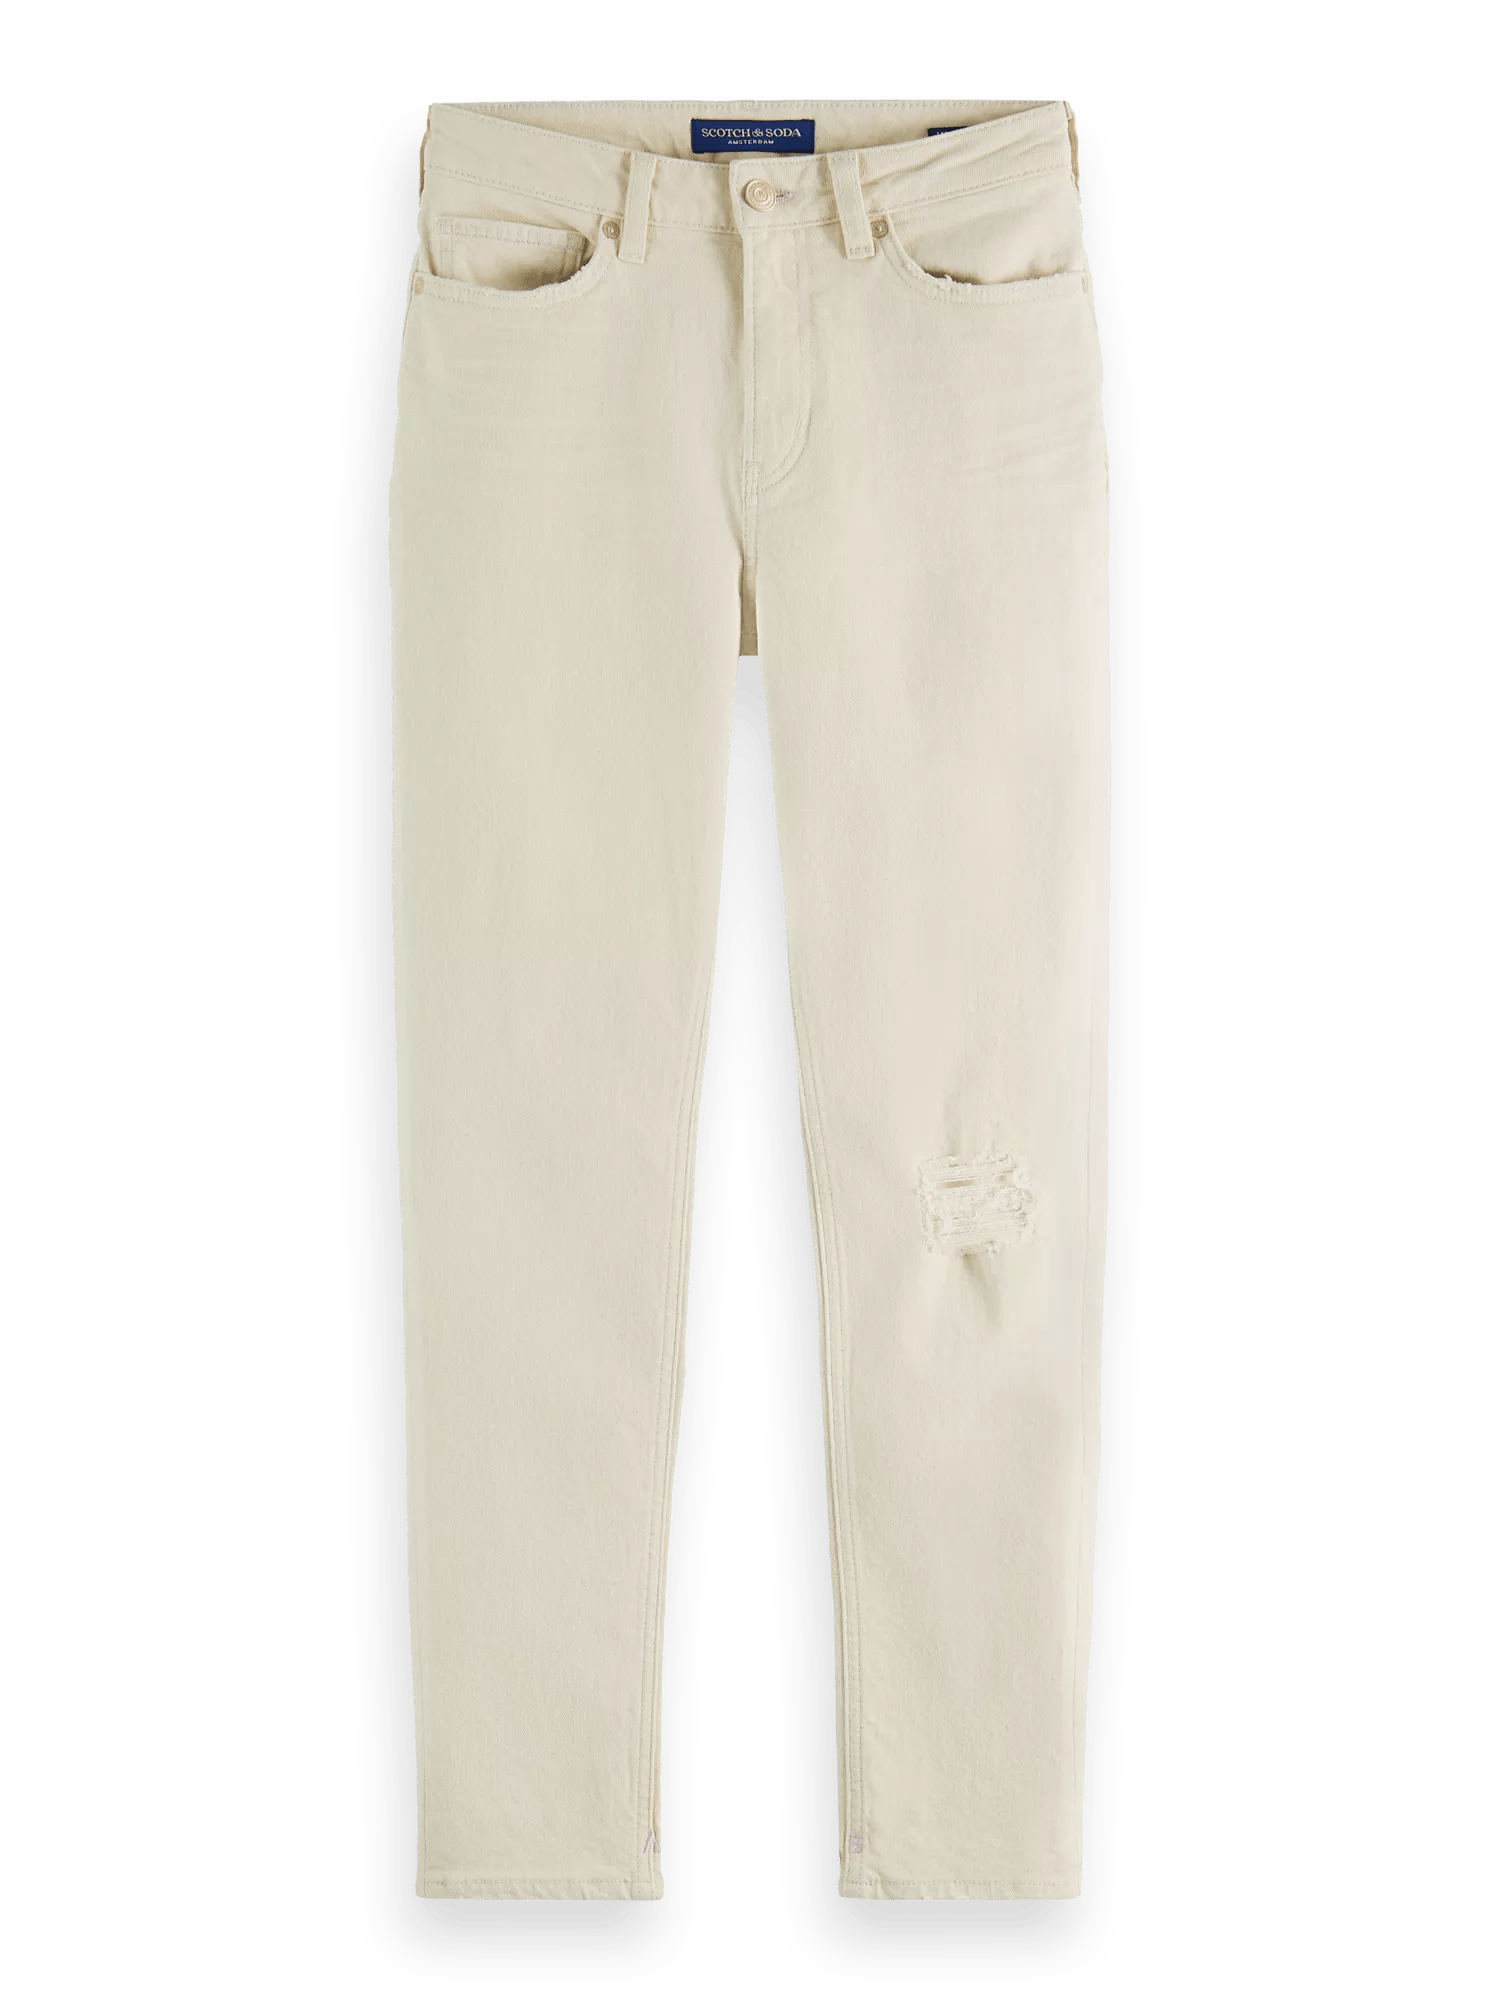 Scotch & Soda High Five slim fit jeans — Forget me not FNT